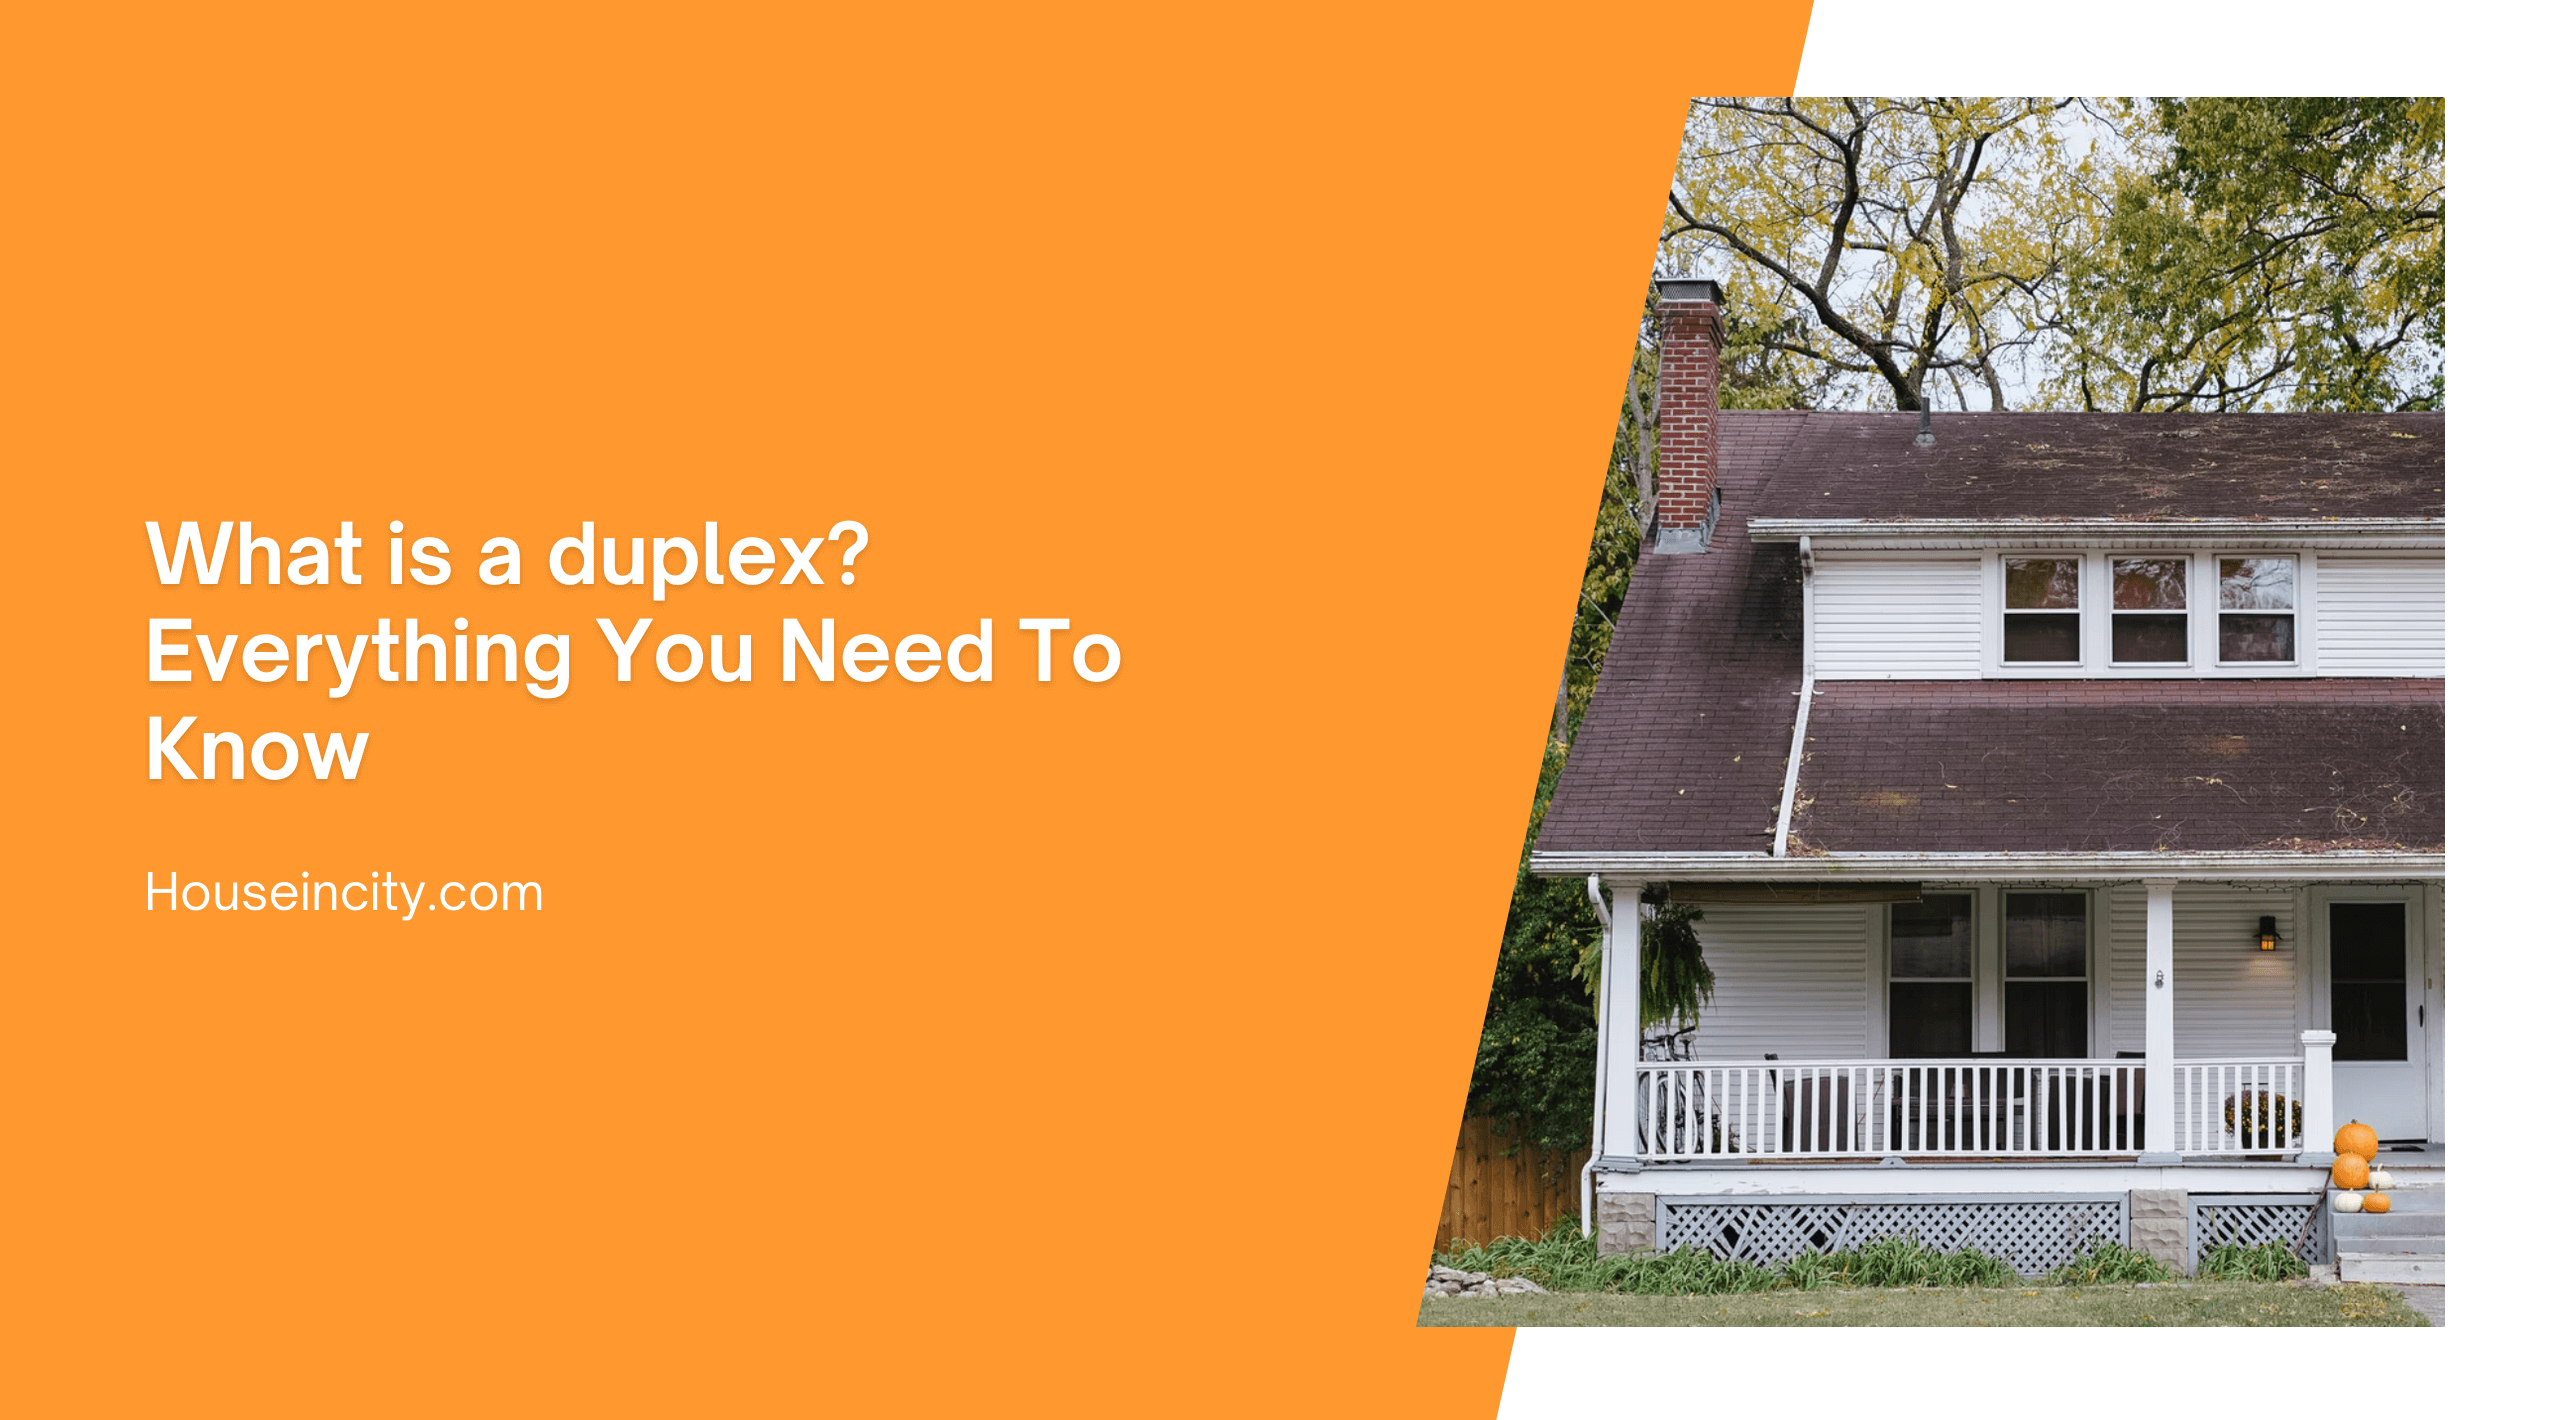 What Is a Duplex? Everything You Need To Know